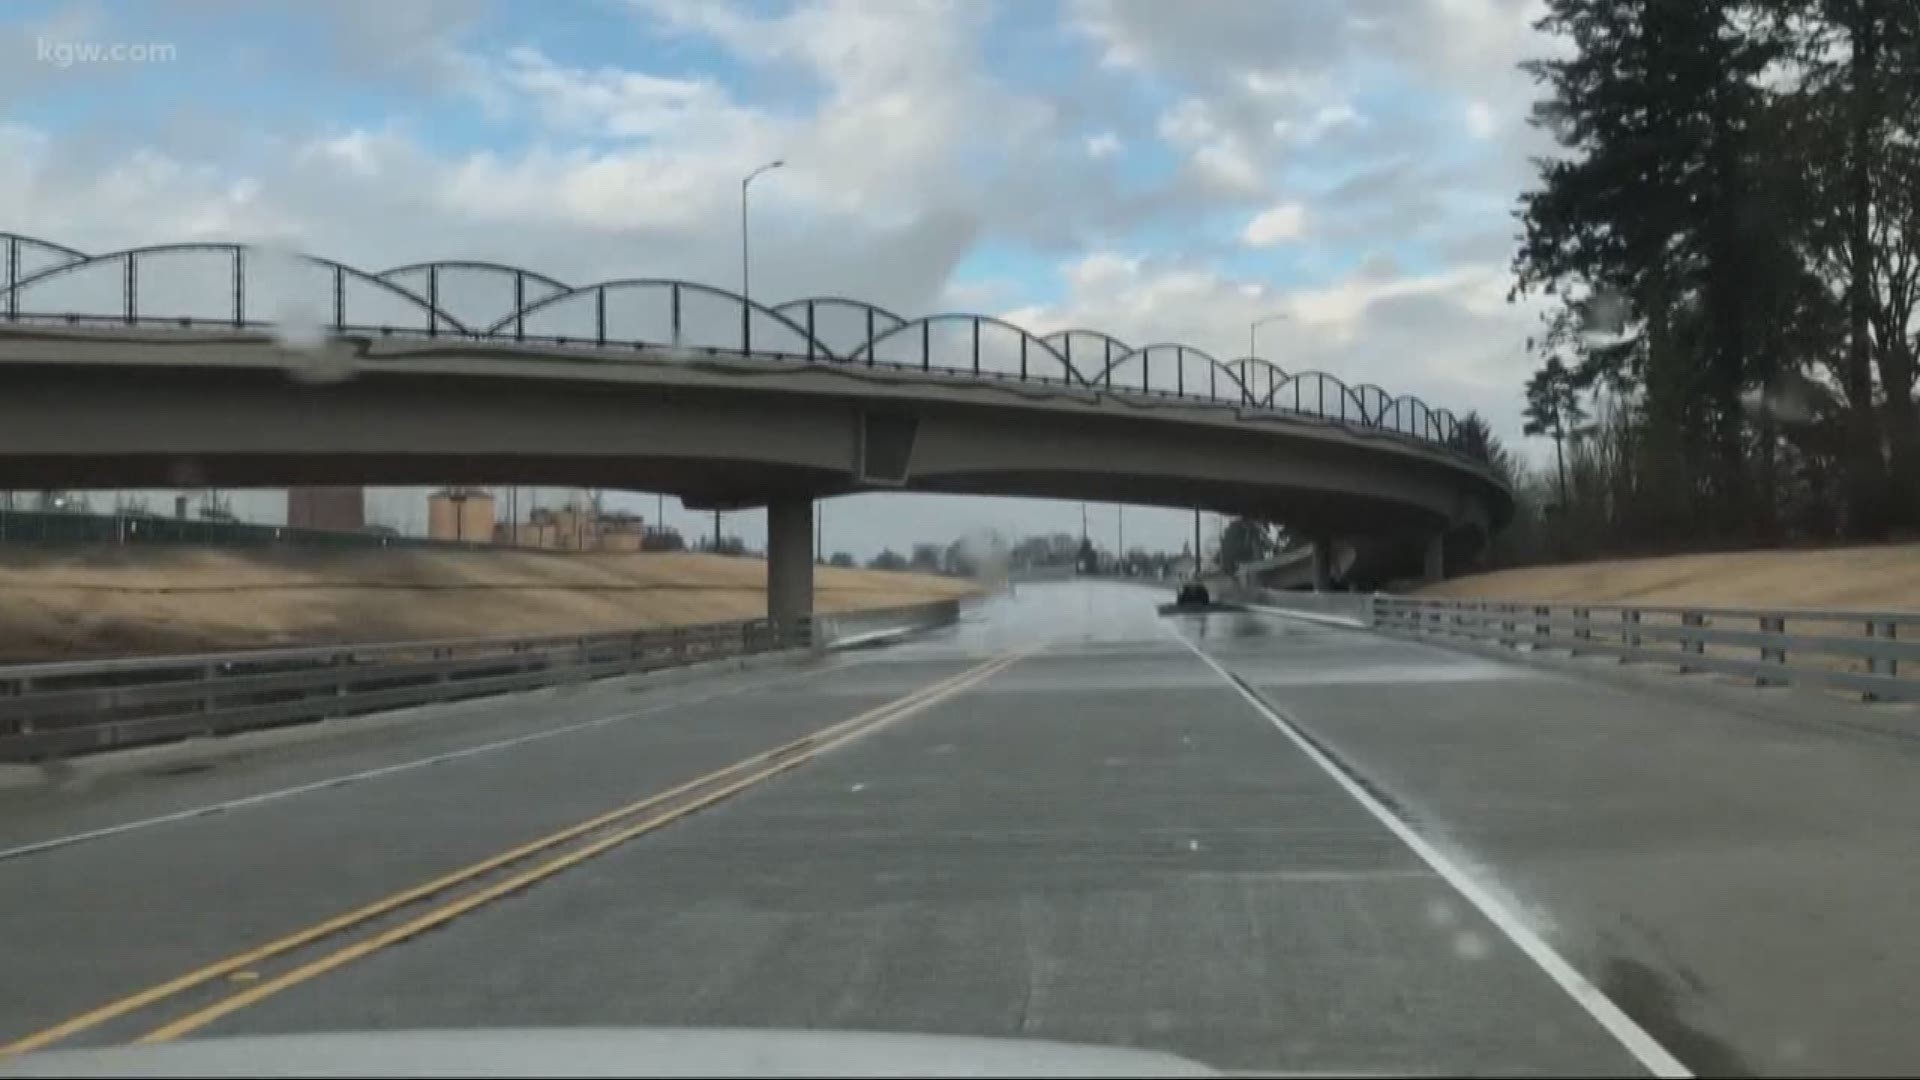 Long anticipated Newberg Dundee bypass opens Saturday